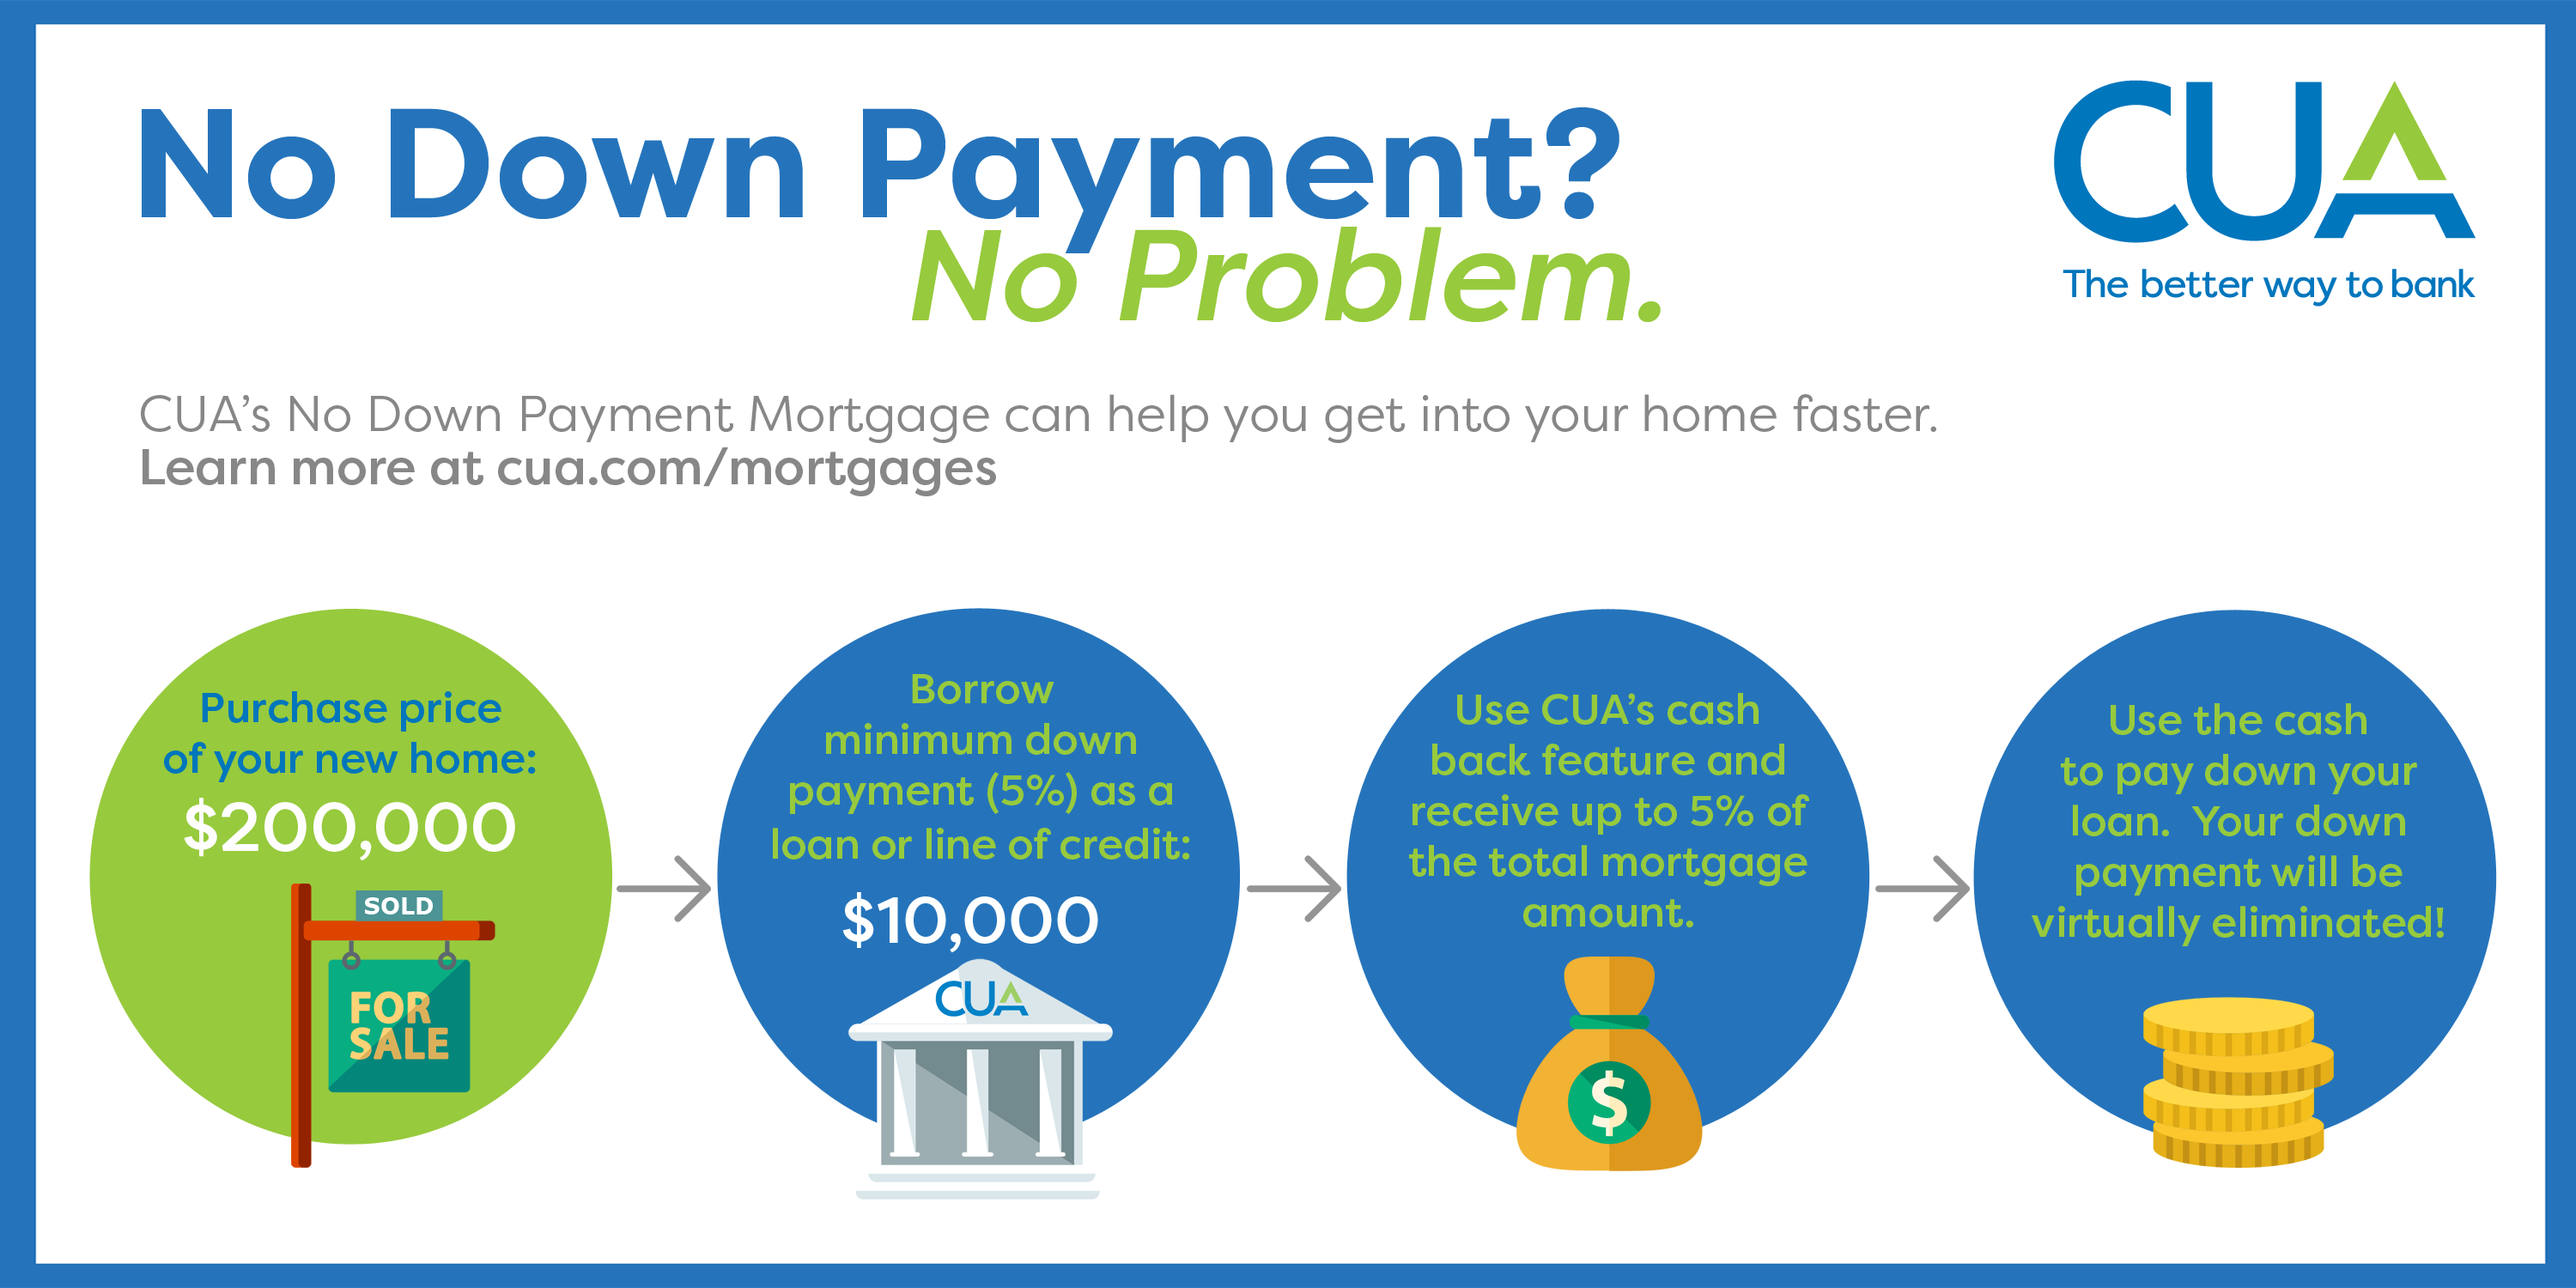 Pay down. Down payment Mortgage. No down payment loan. Payment problems. How to buy a Home with Bad credit.